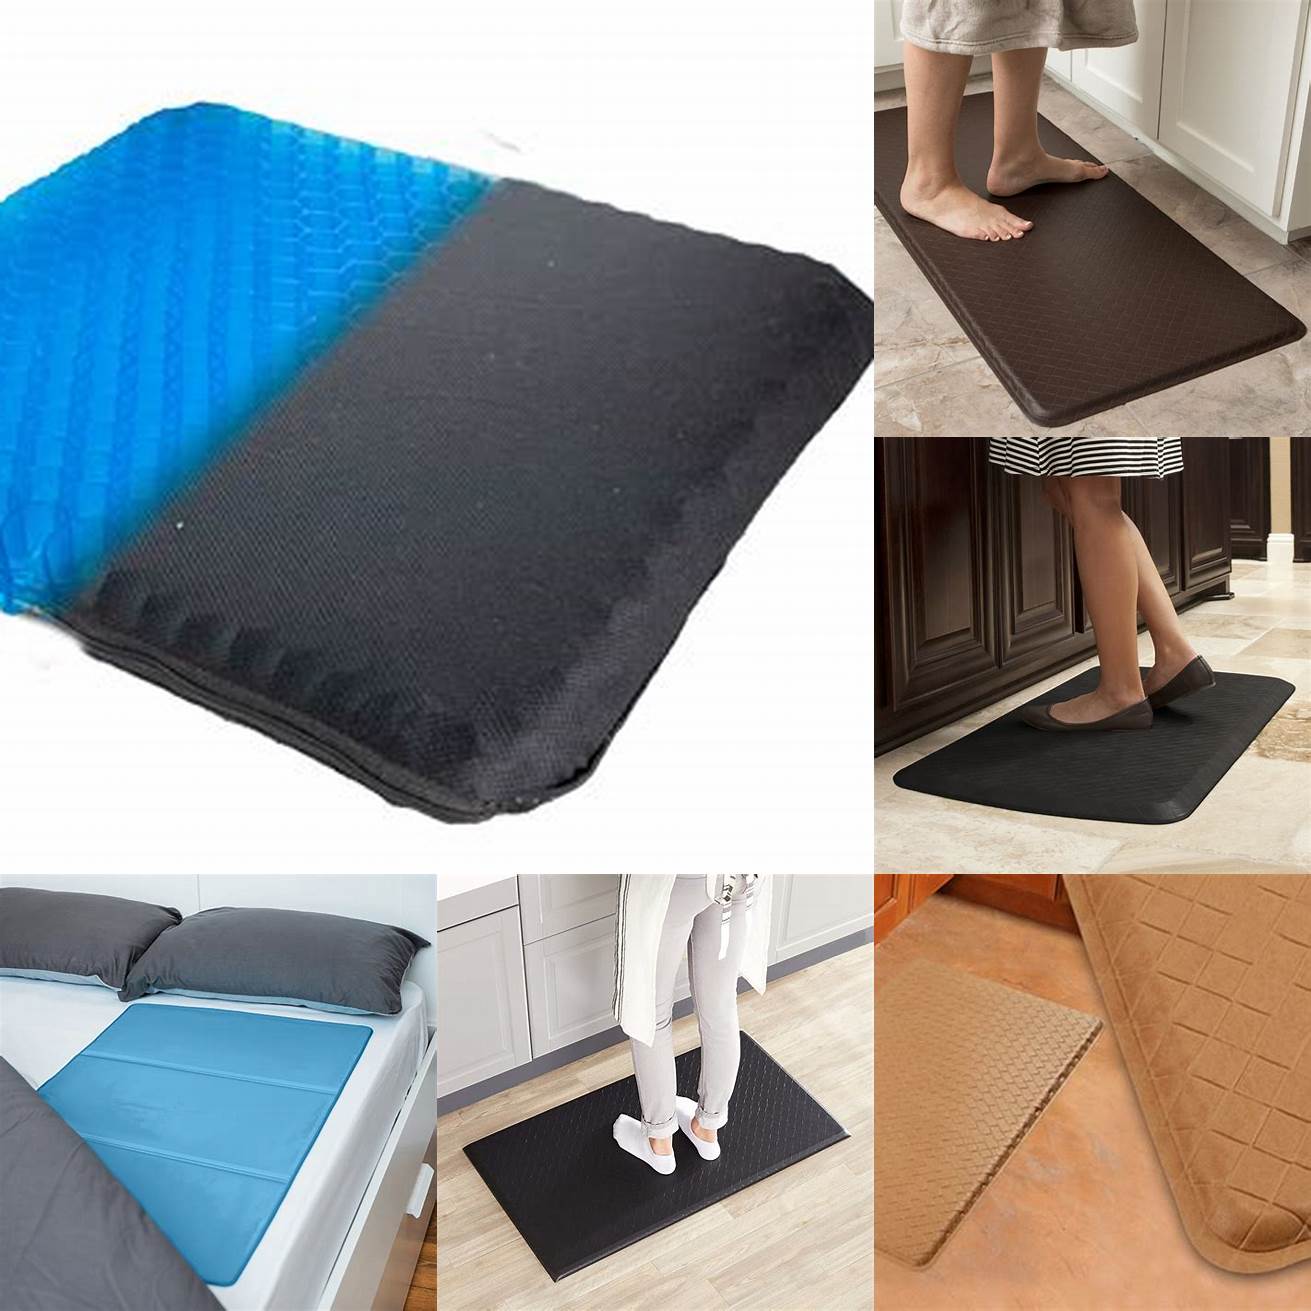 2 Gel Mats These mats are filled with gel and provide extra cushioning and support They are ideal for people with foot and leg problems